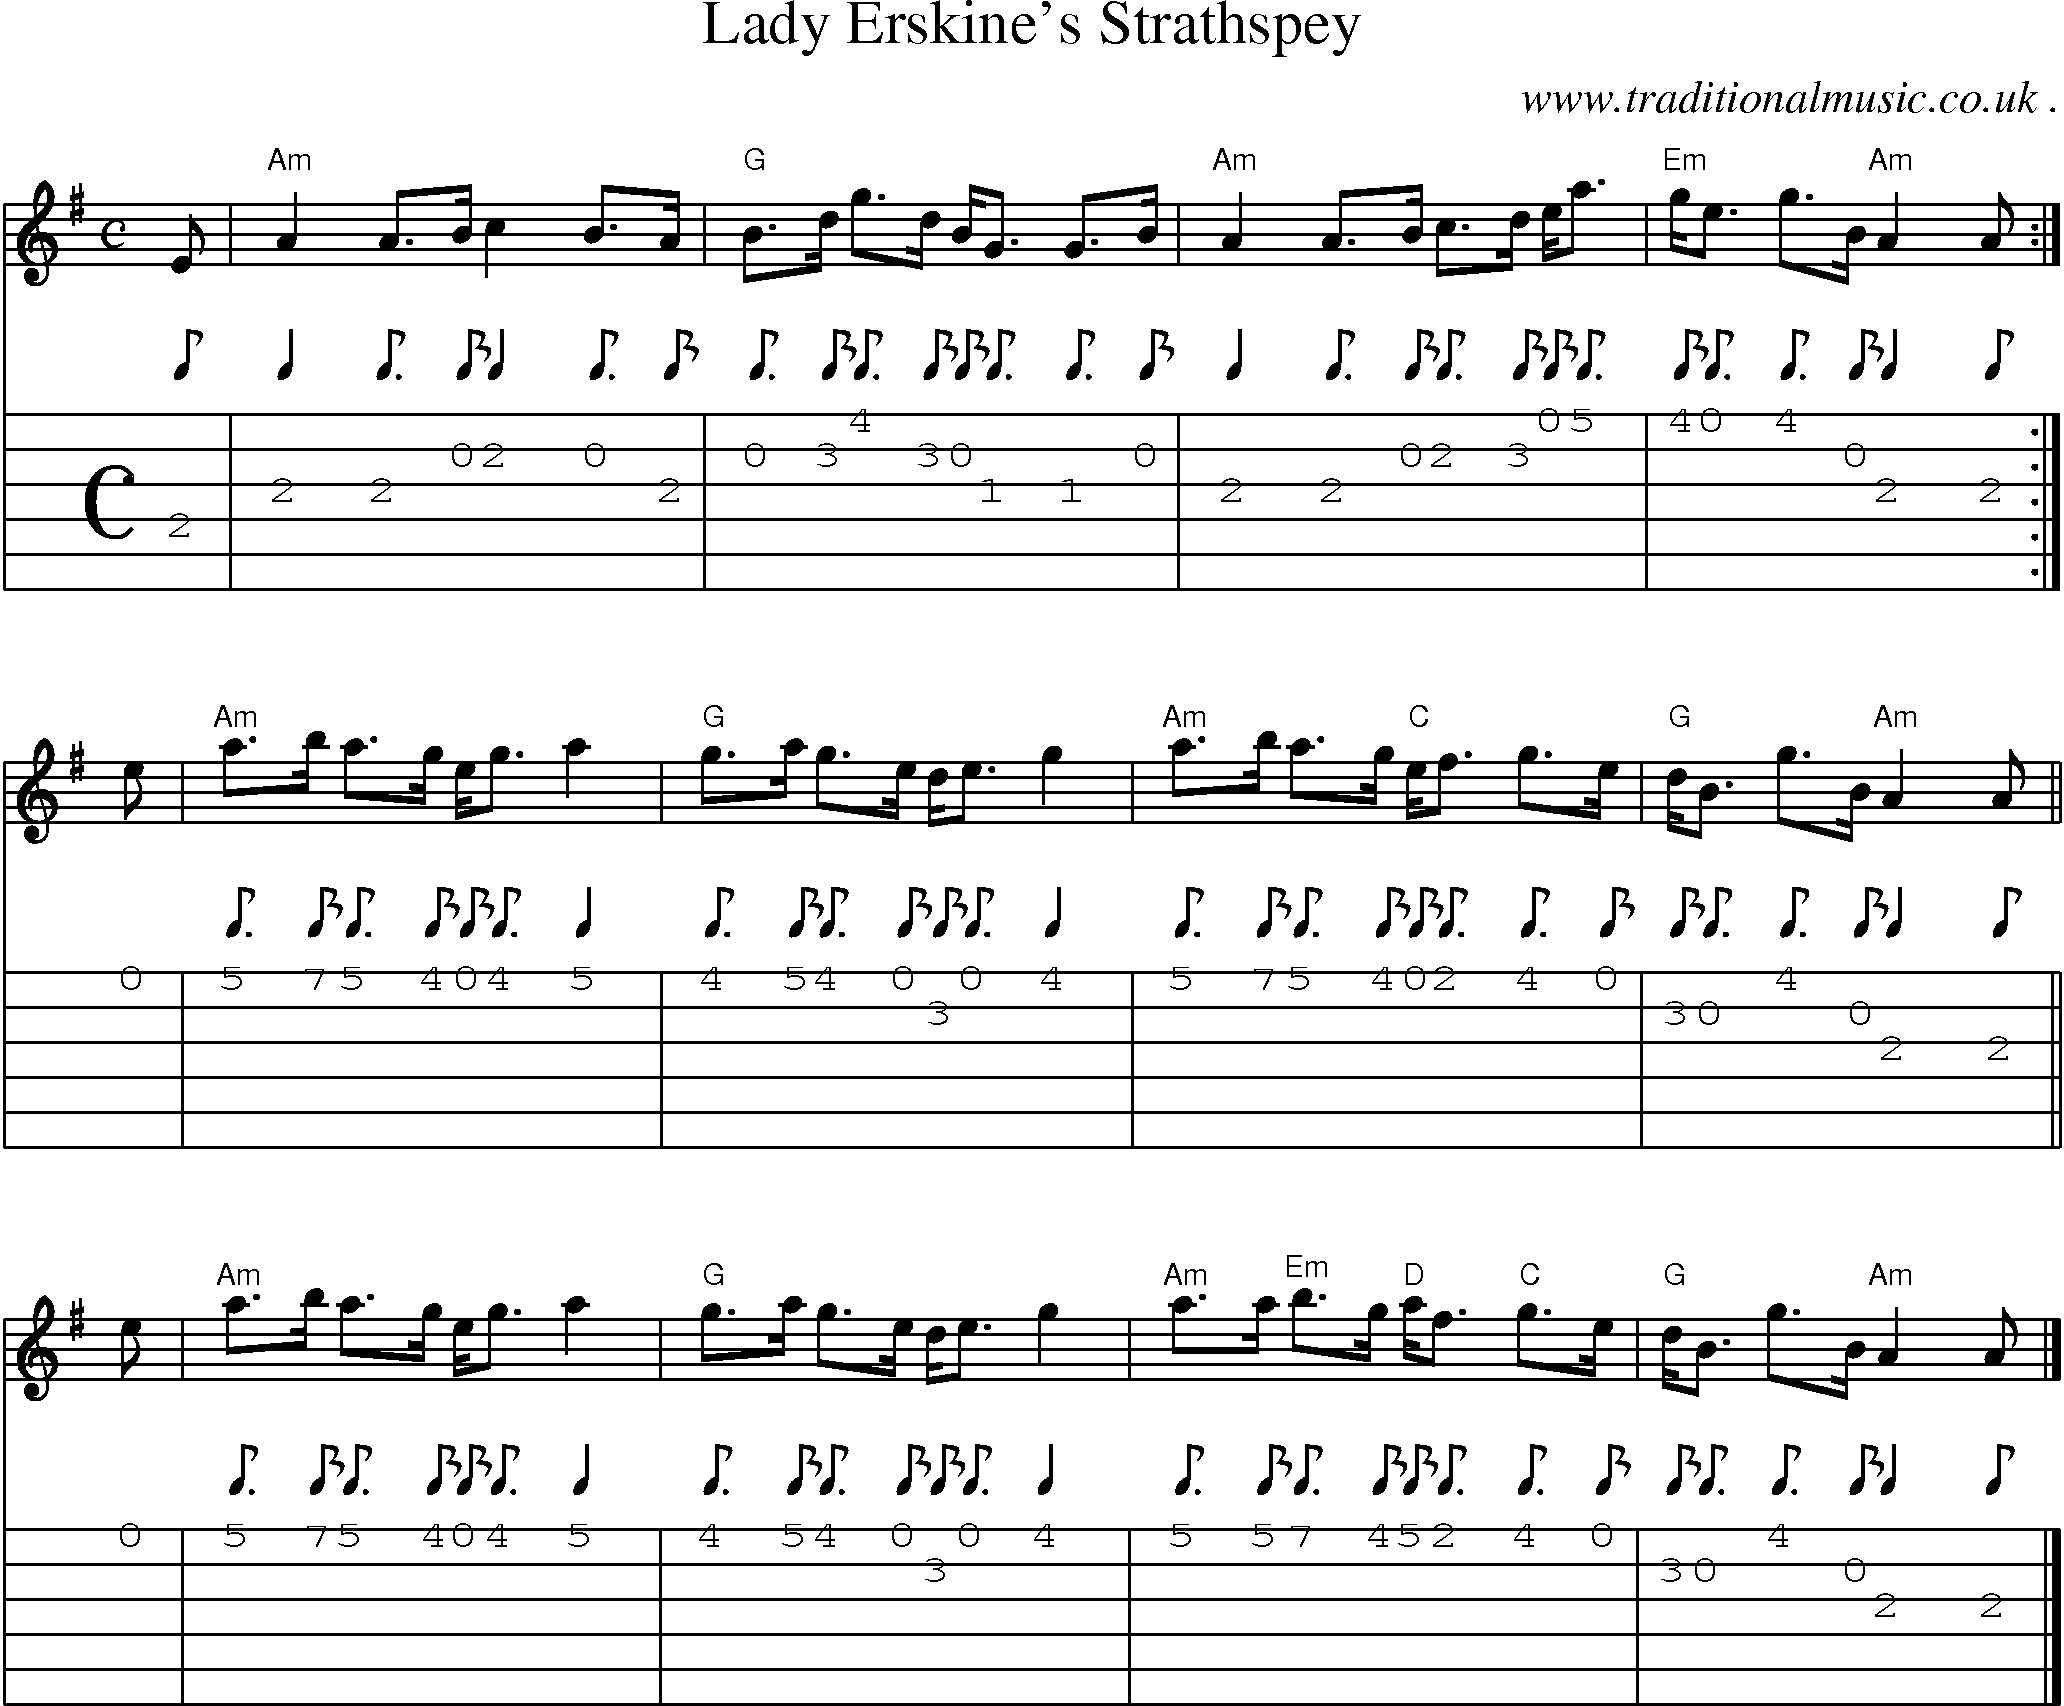 Sheet-music  score, Chords and Guitar Tabs for Lady Erskines Strathspey